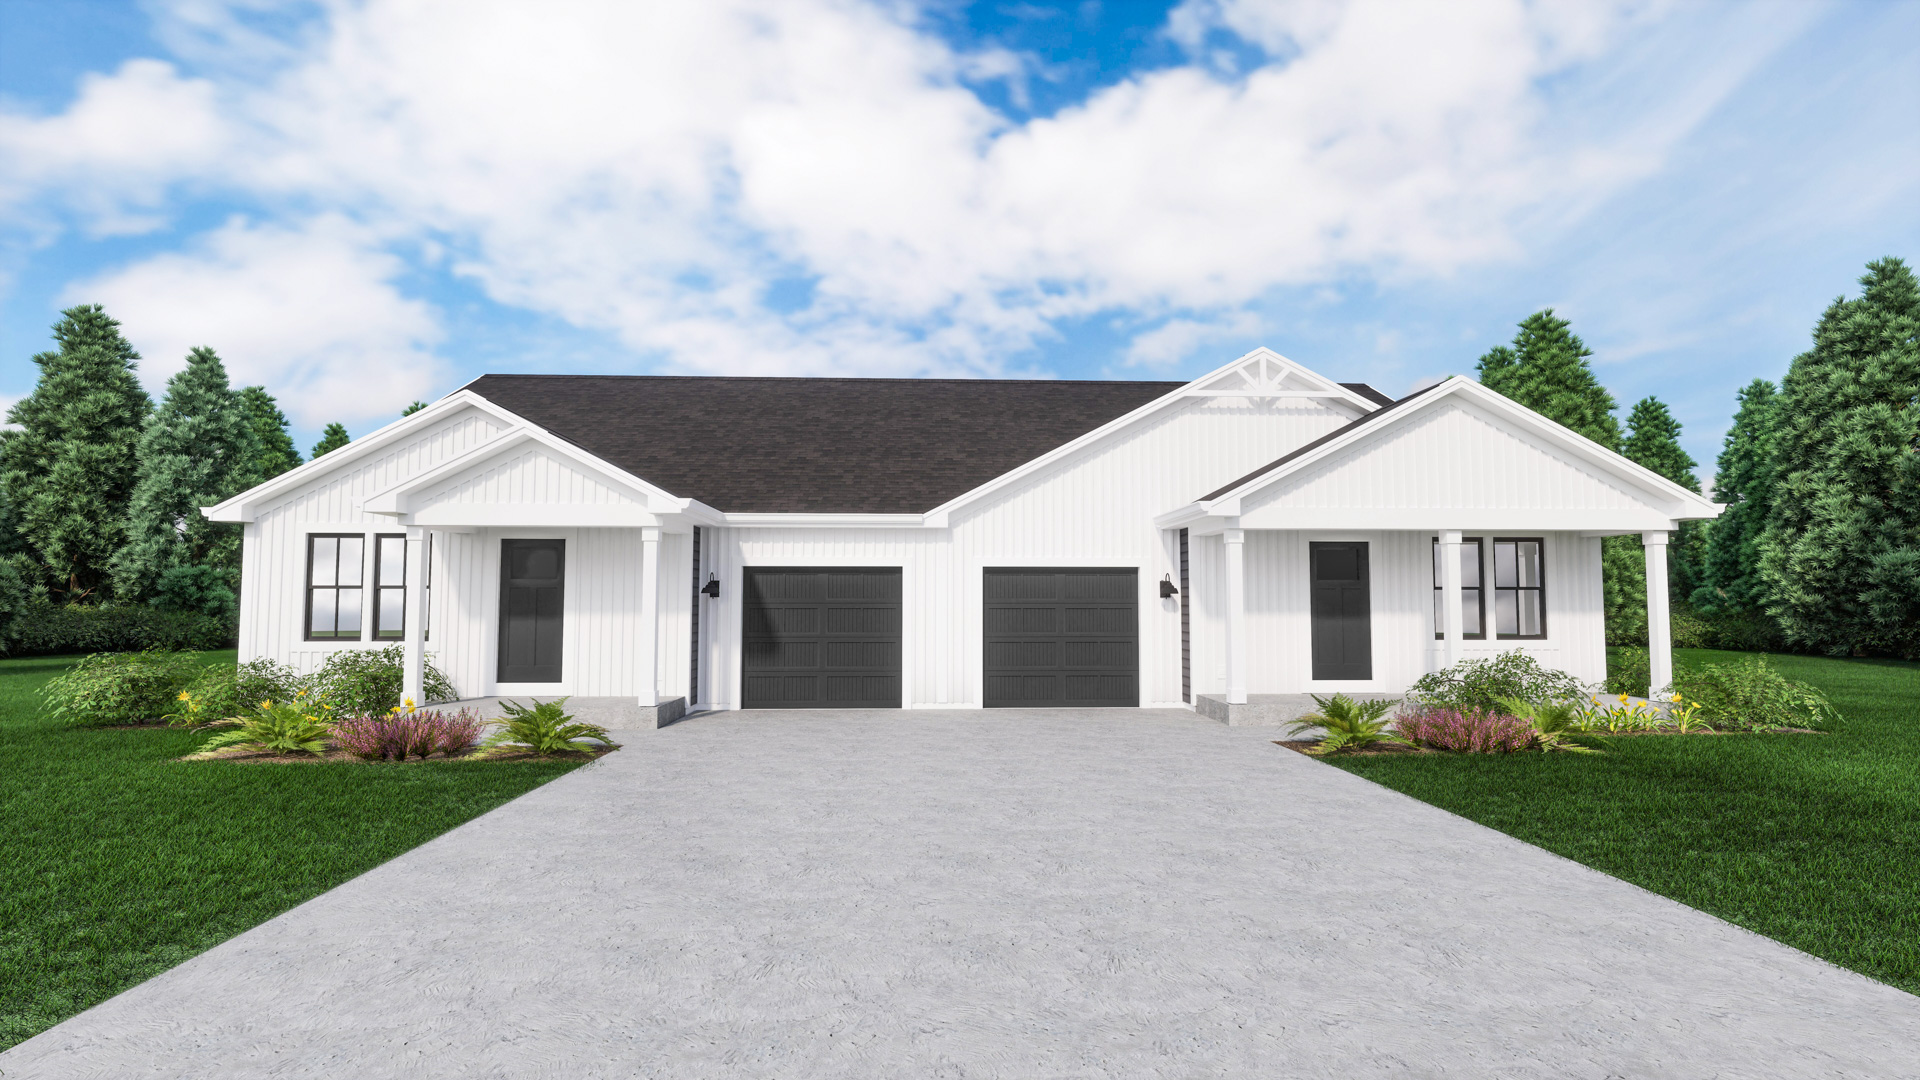 The Birch Duplex Condo Rendering by Stepping Stone Homes